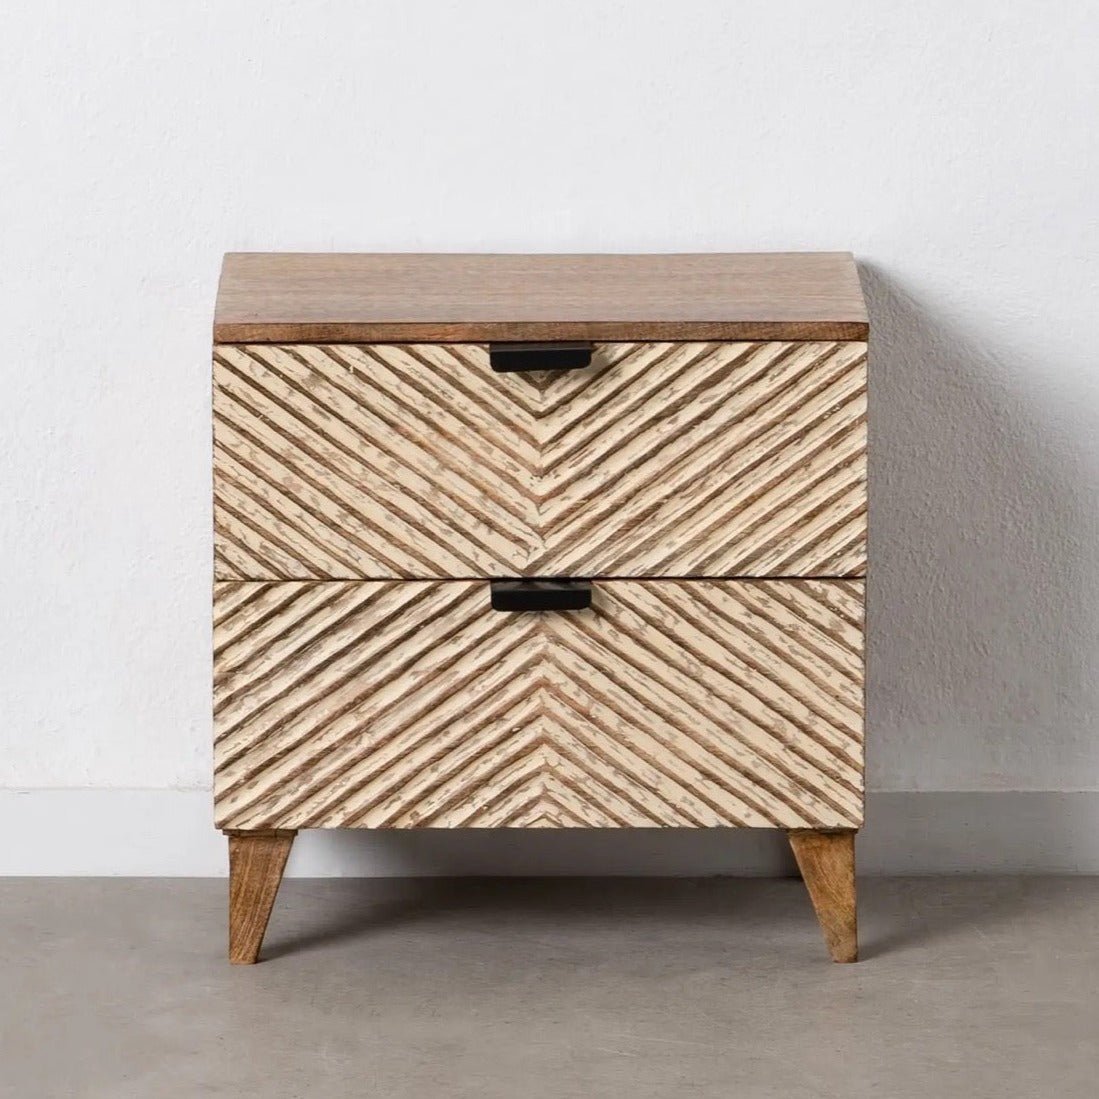 Natural Mango Wood End Table with 4 Storage Drawers, Geometric, Spanish Style